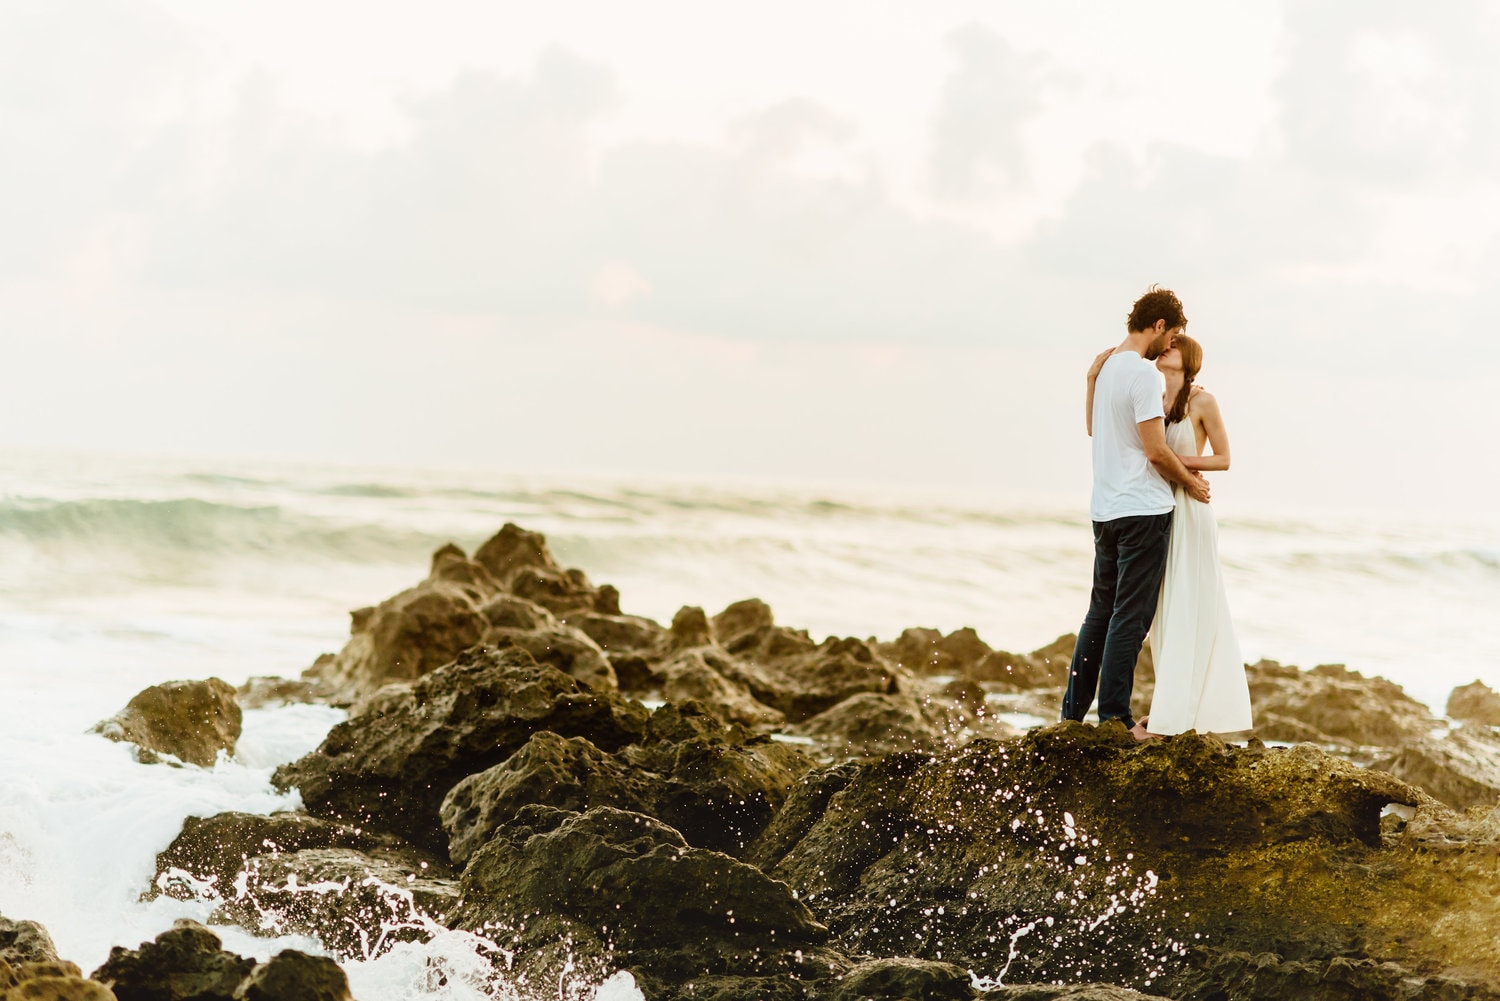 Bride and groom share a kiss while standing on rocks along the shore in Santa Teresa, Costa Rica.